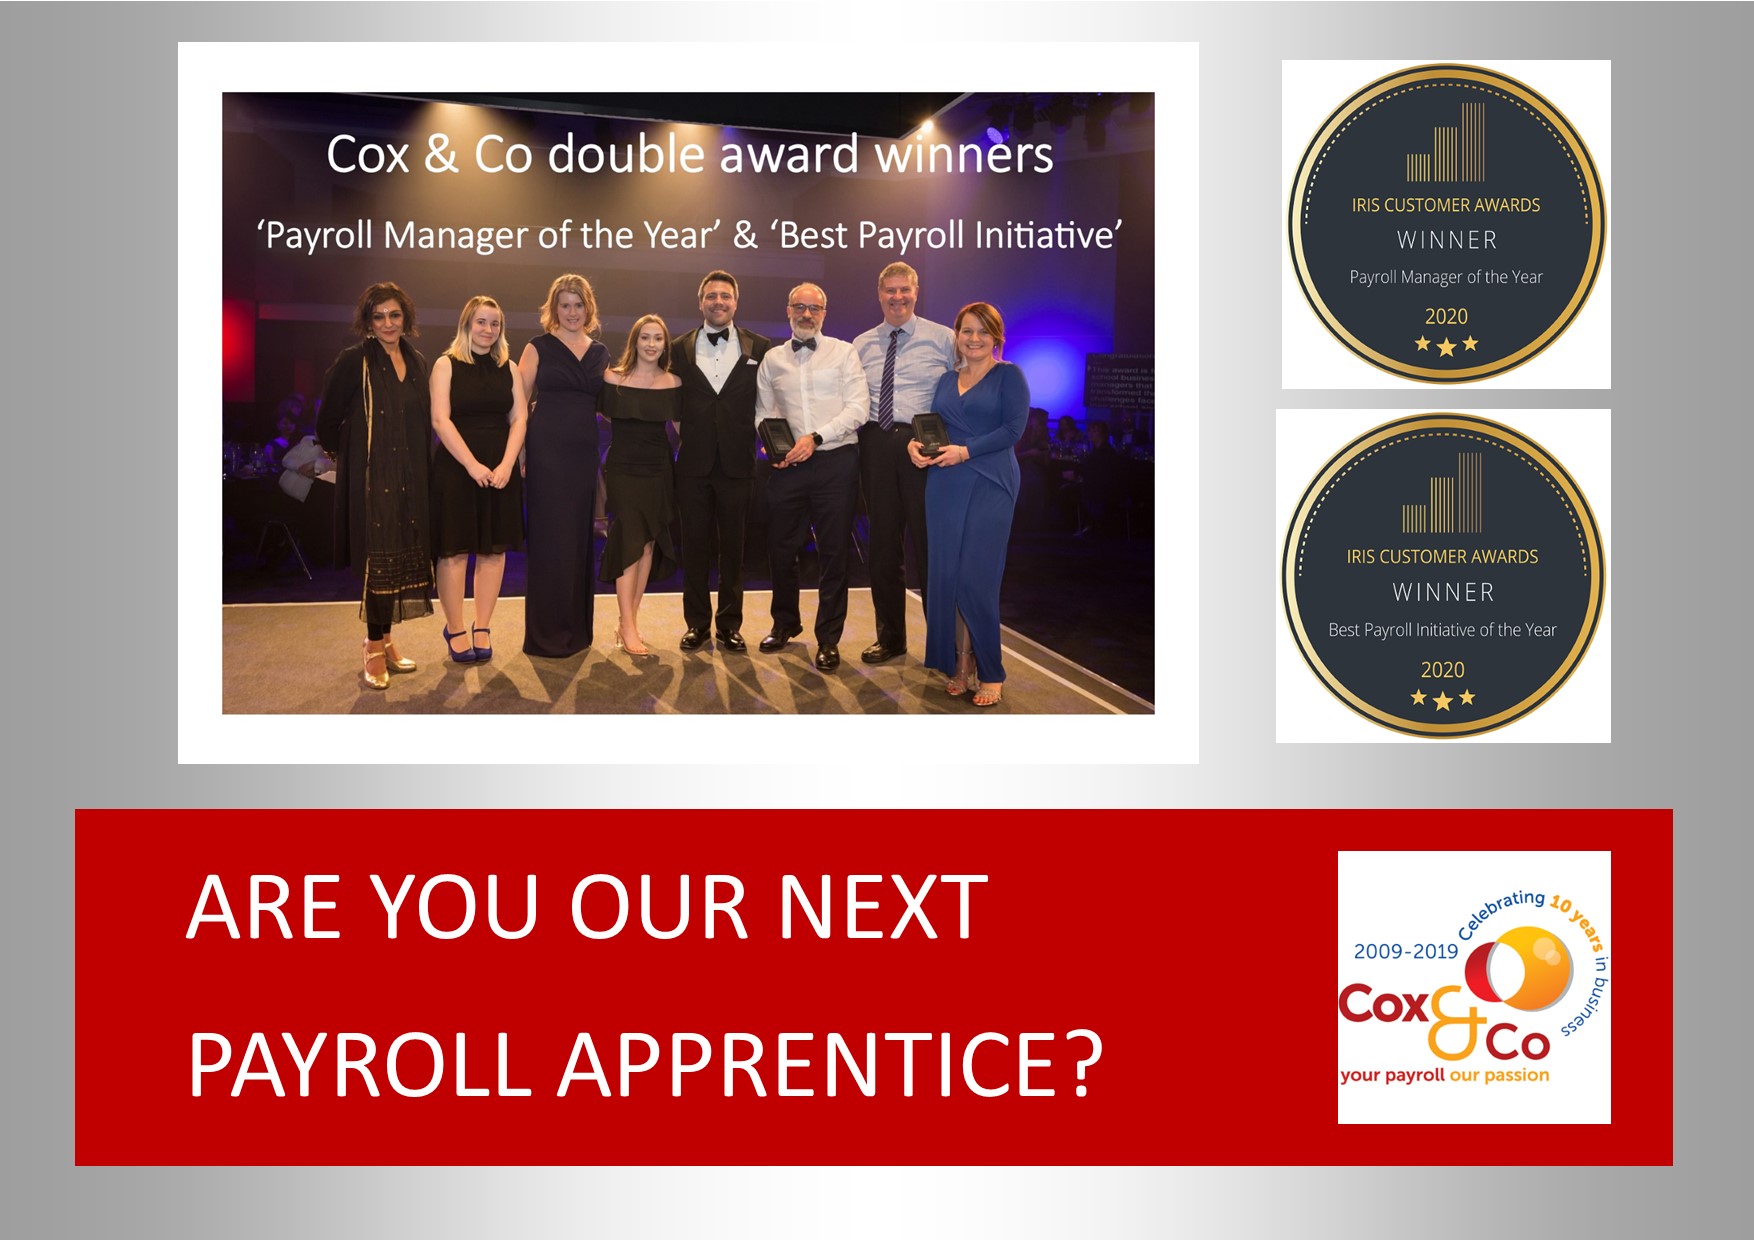 Payroll Careers – Payroll Apprentice Opportunity